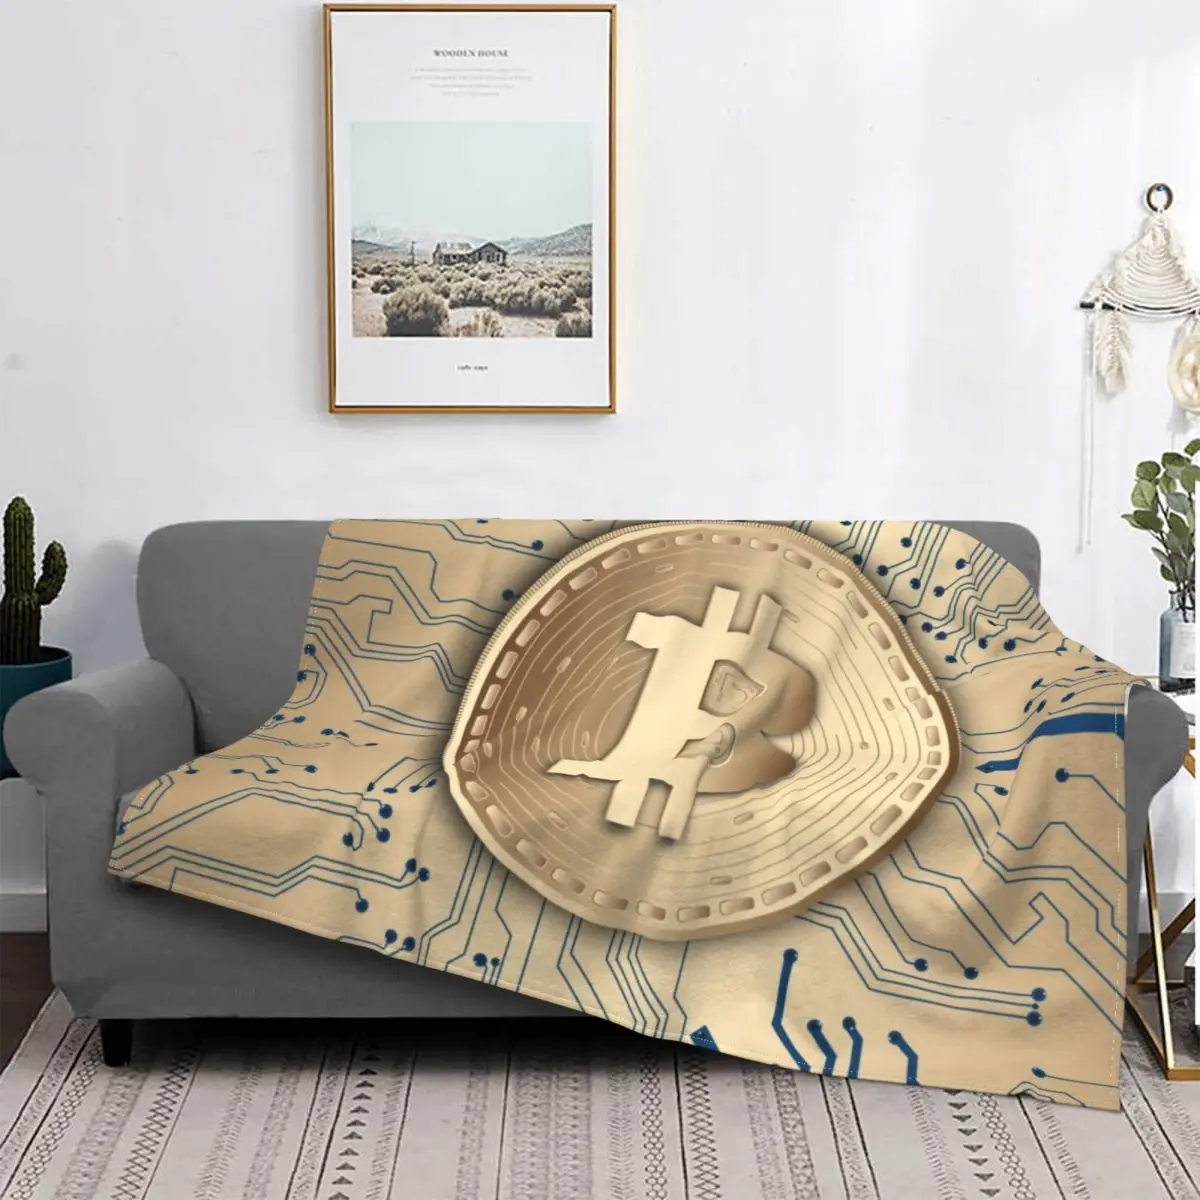 

Bitcoin Pattern Flannel Throw Blanket Soft Cozy Warm BTC Cryptocurrency Home Bedroom Sofa Couch Bed Kids Adults Travel Camping